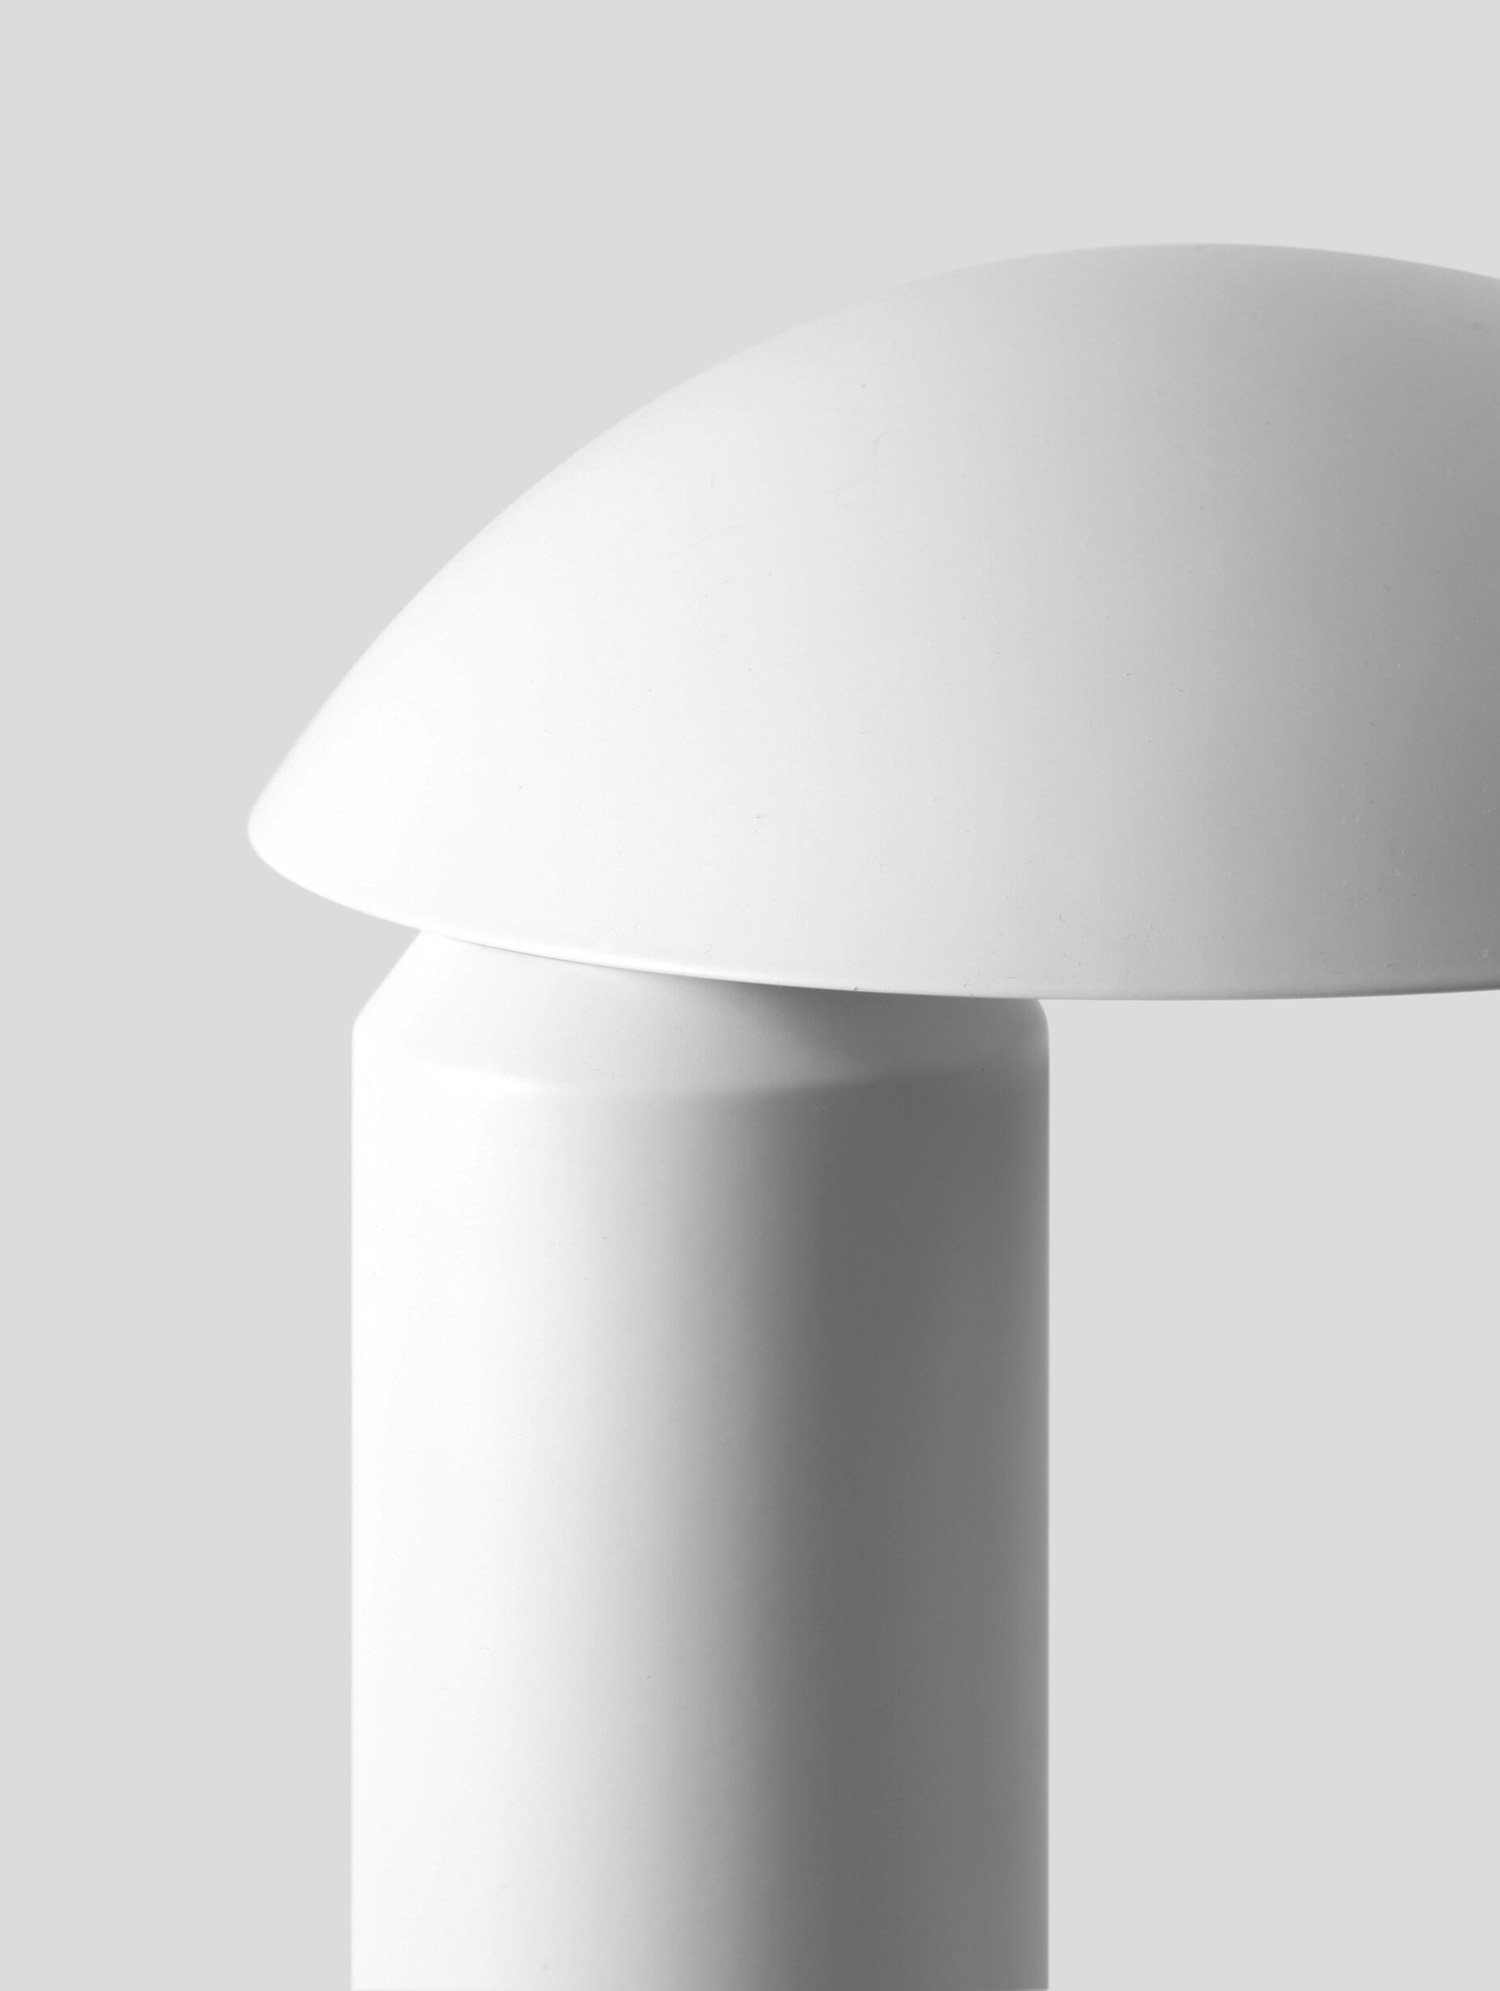 Detail of White Minimalist Table Lamp "Abyss" by FROM LIGHTING